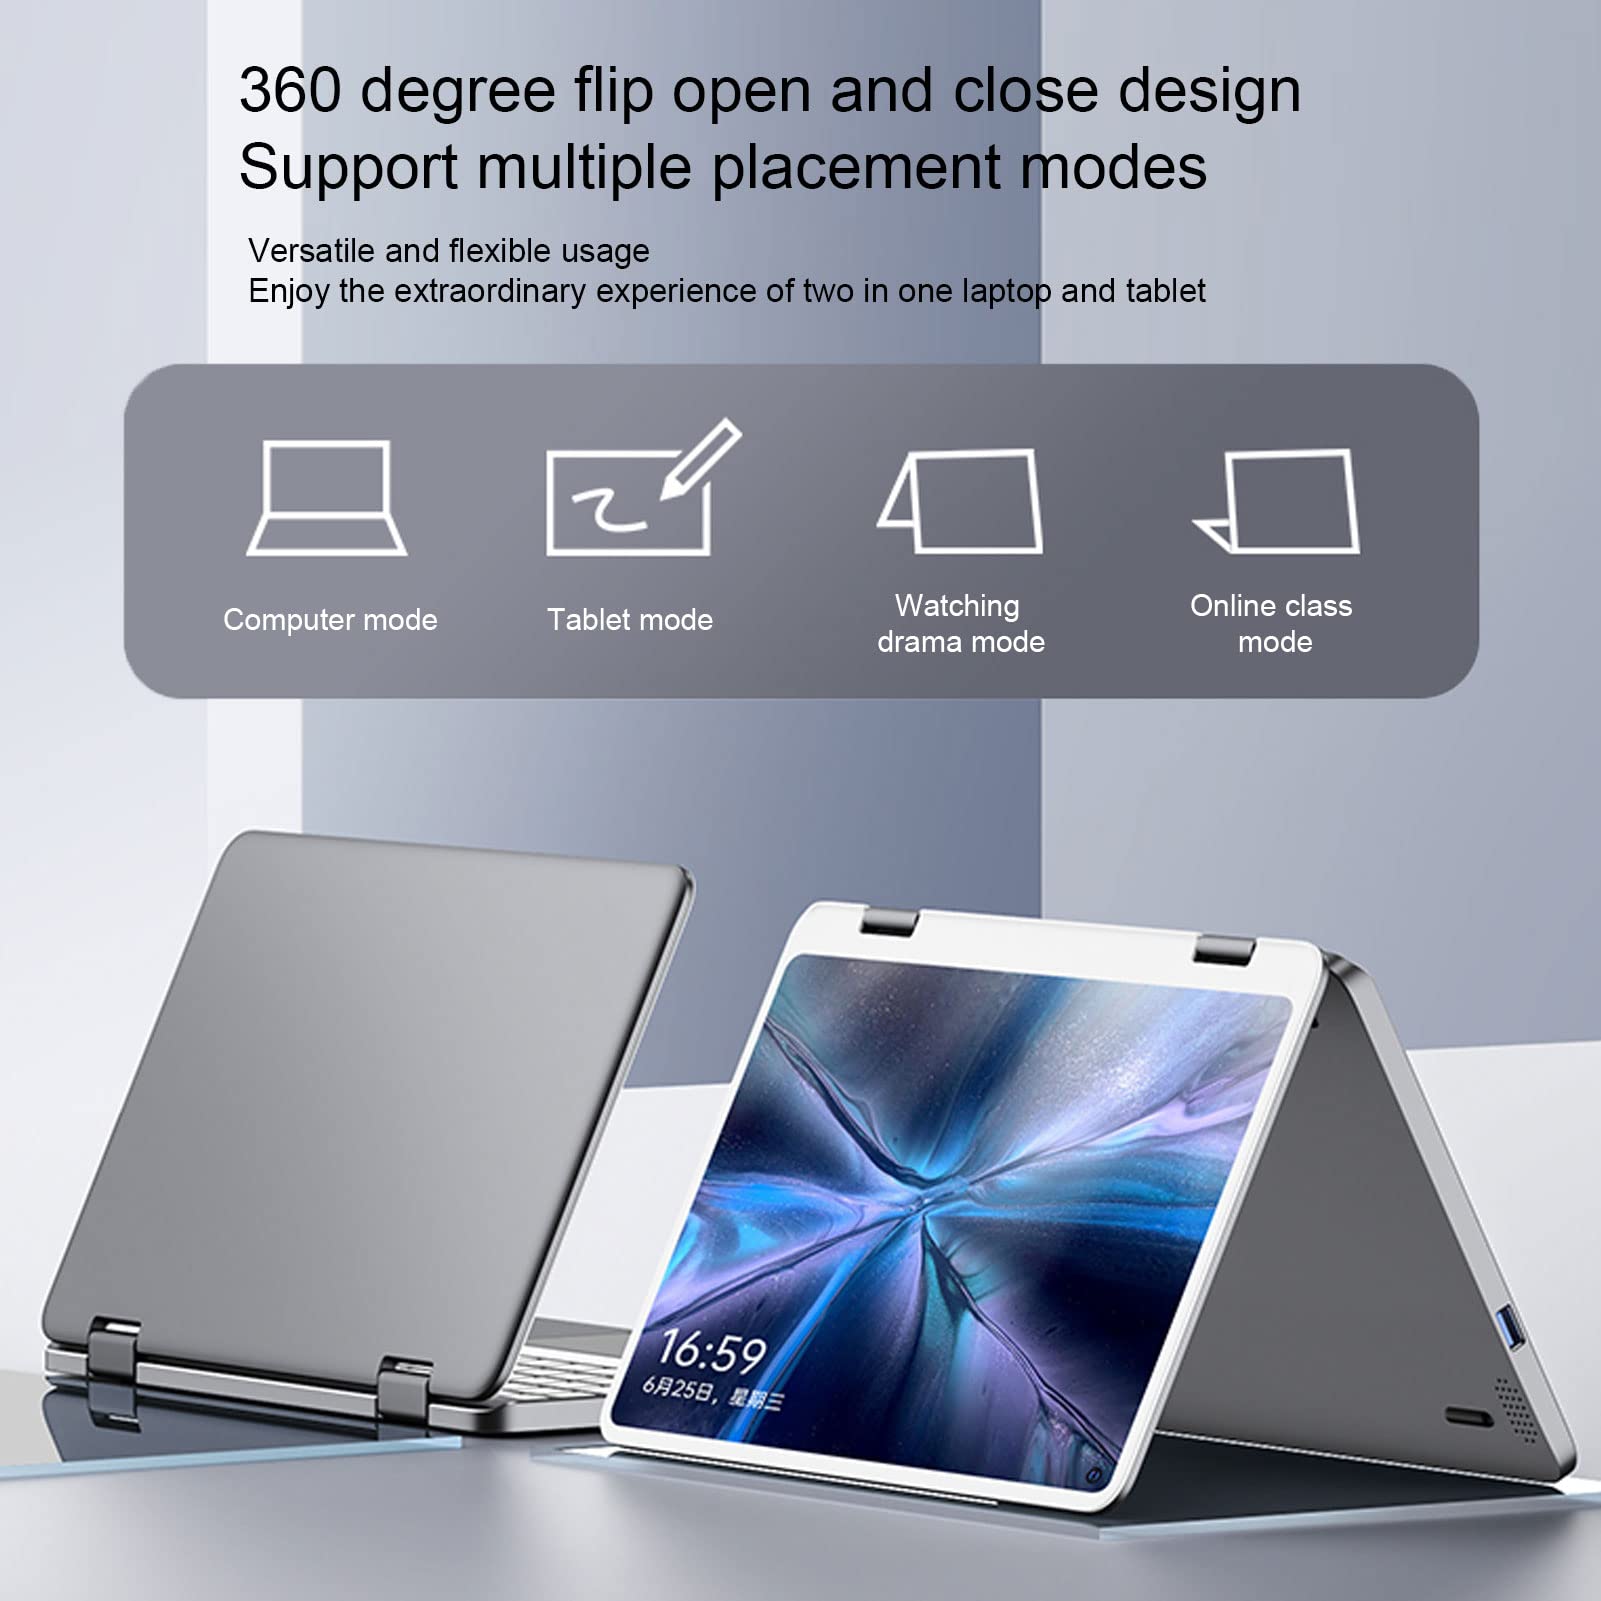 Sanpyl 2-in-1 Laptop, 10.8inch FHD Touchscreen Tablet and Laptop 2 in 1, 360 Degree Rotation Thin and Light Design, 8GB RAM 512GB ROM, for Intel Celeron N5100, All Metal Body